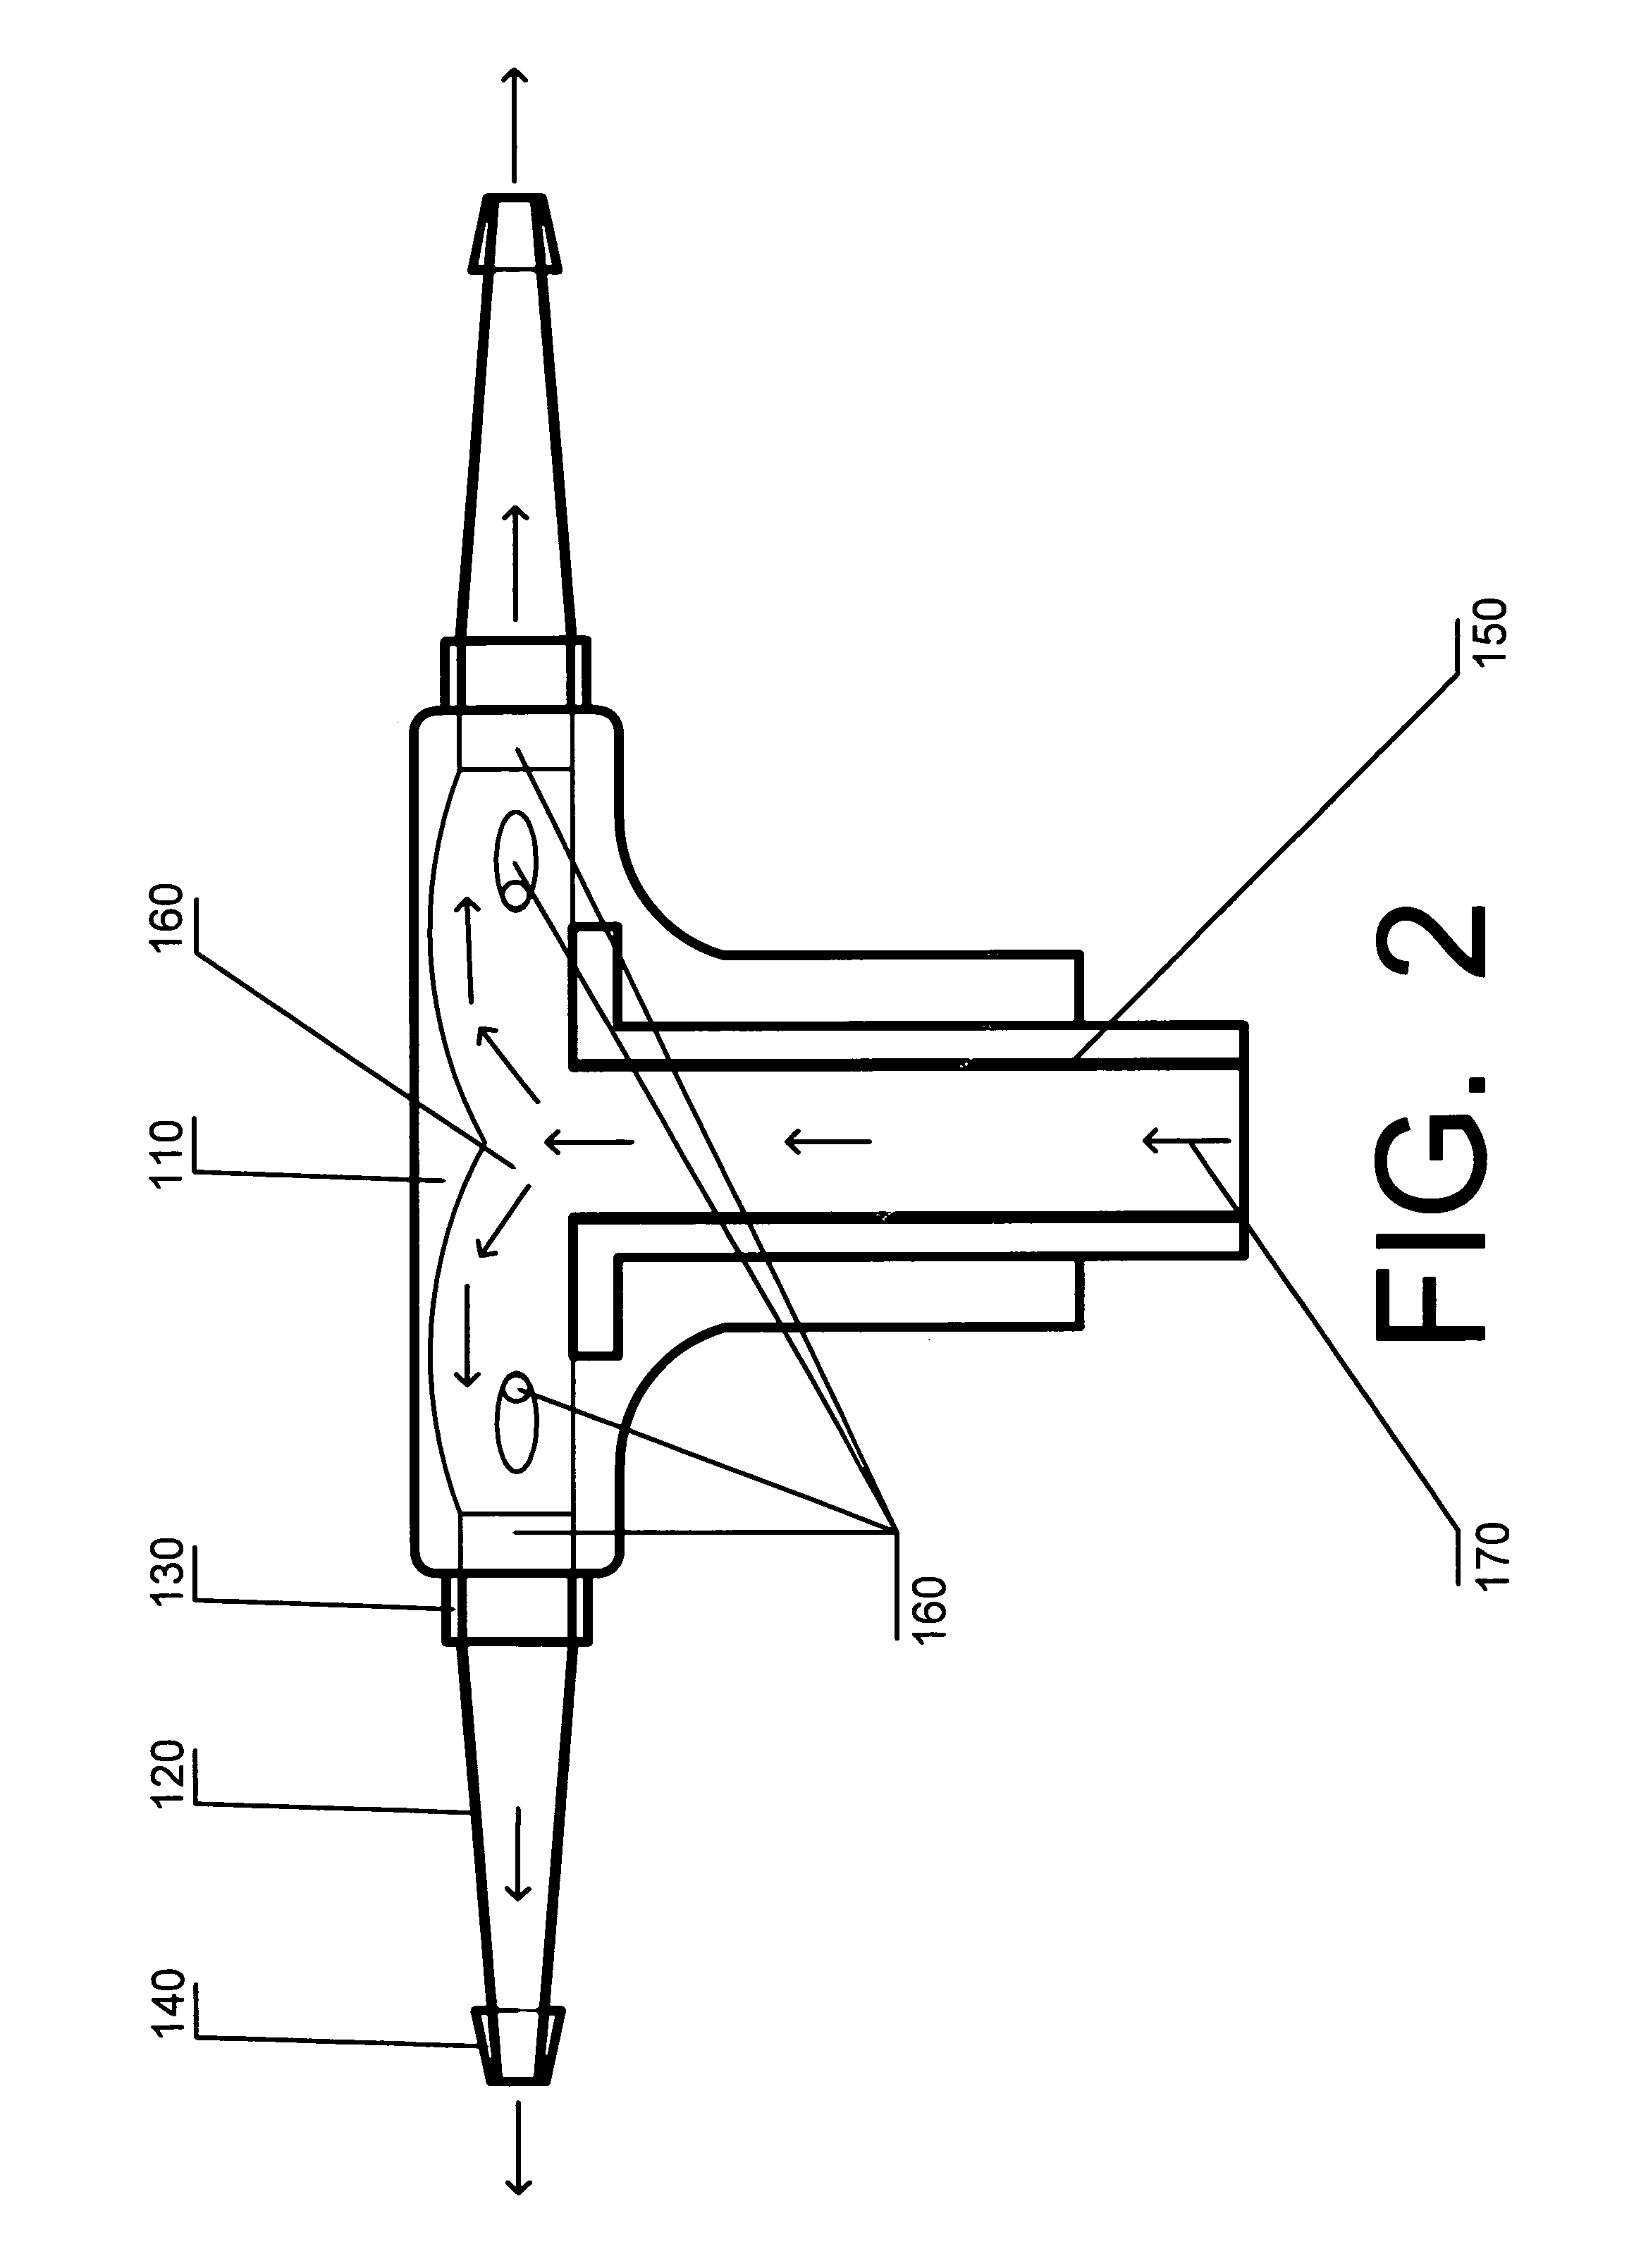 Method and system for protection of vessels against intrusions